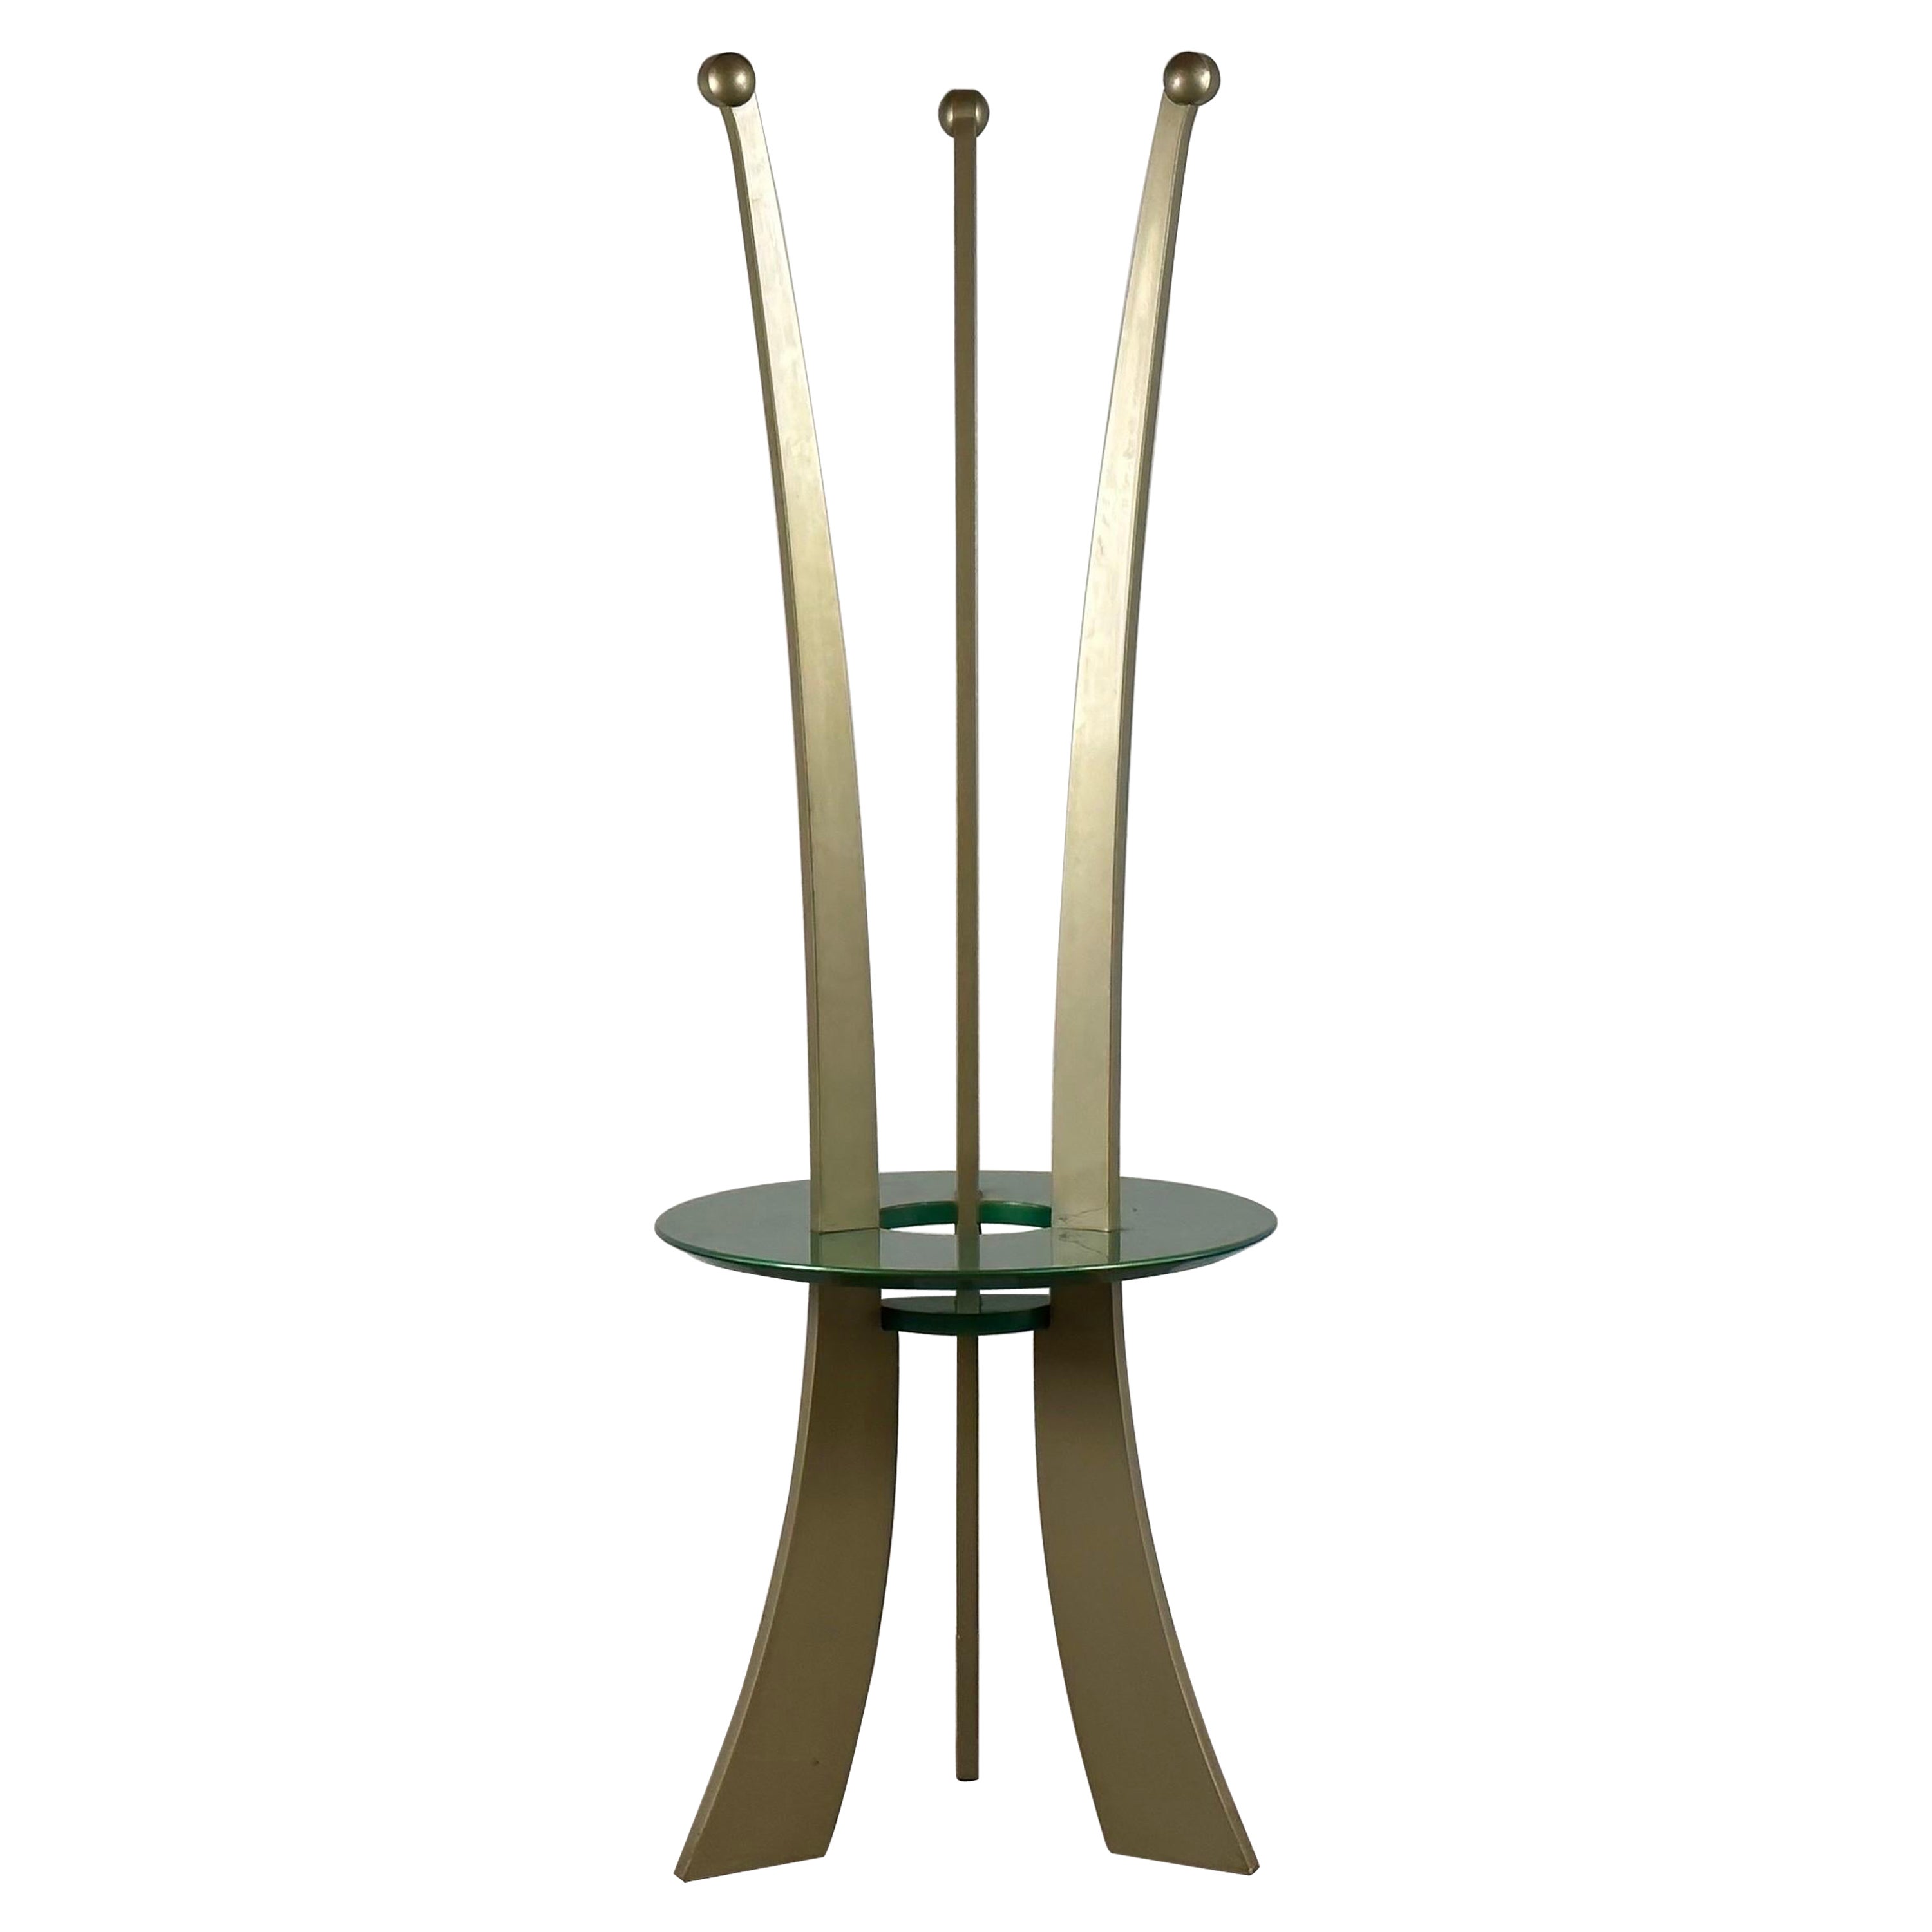 Archizoom 'Orchidea' Coat Stand by Massimo Morozzi, 1980s For Sale